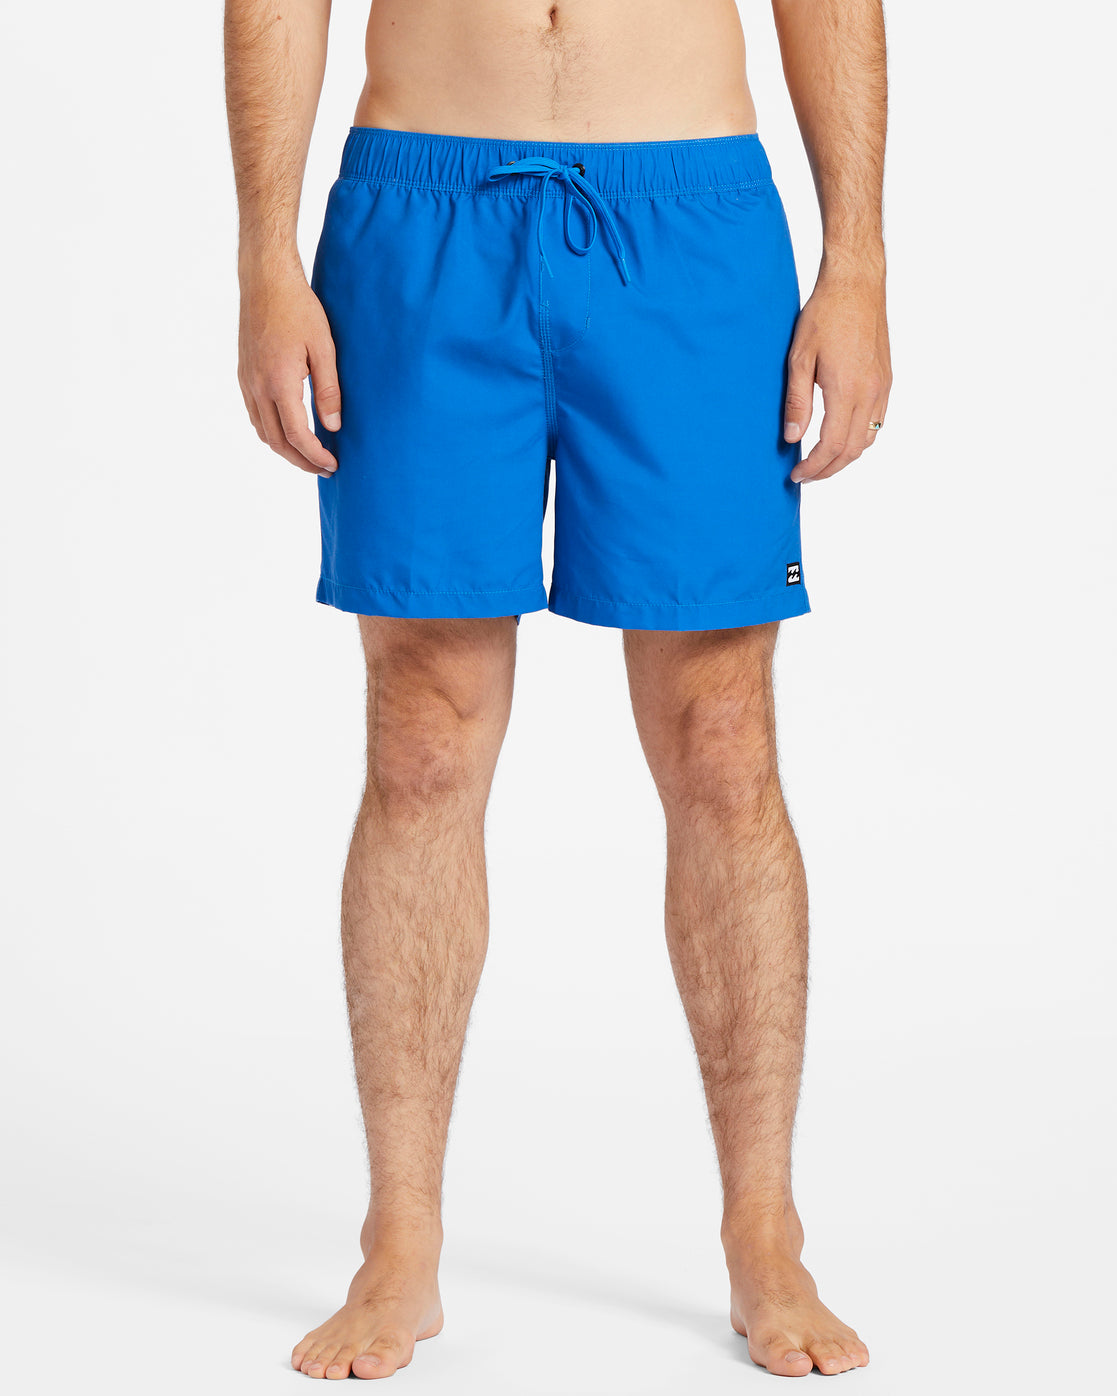 All Day Layback Boarshorts - COBALT